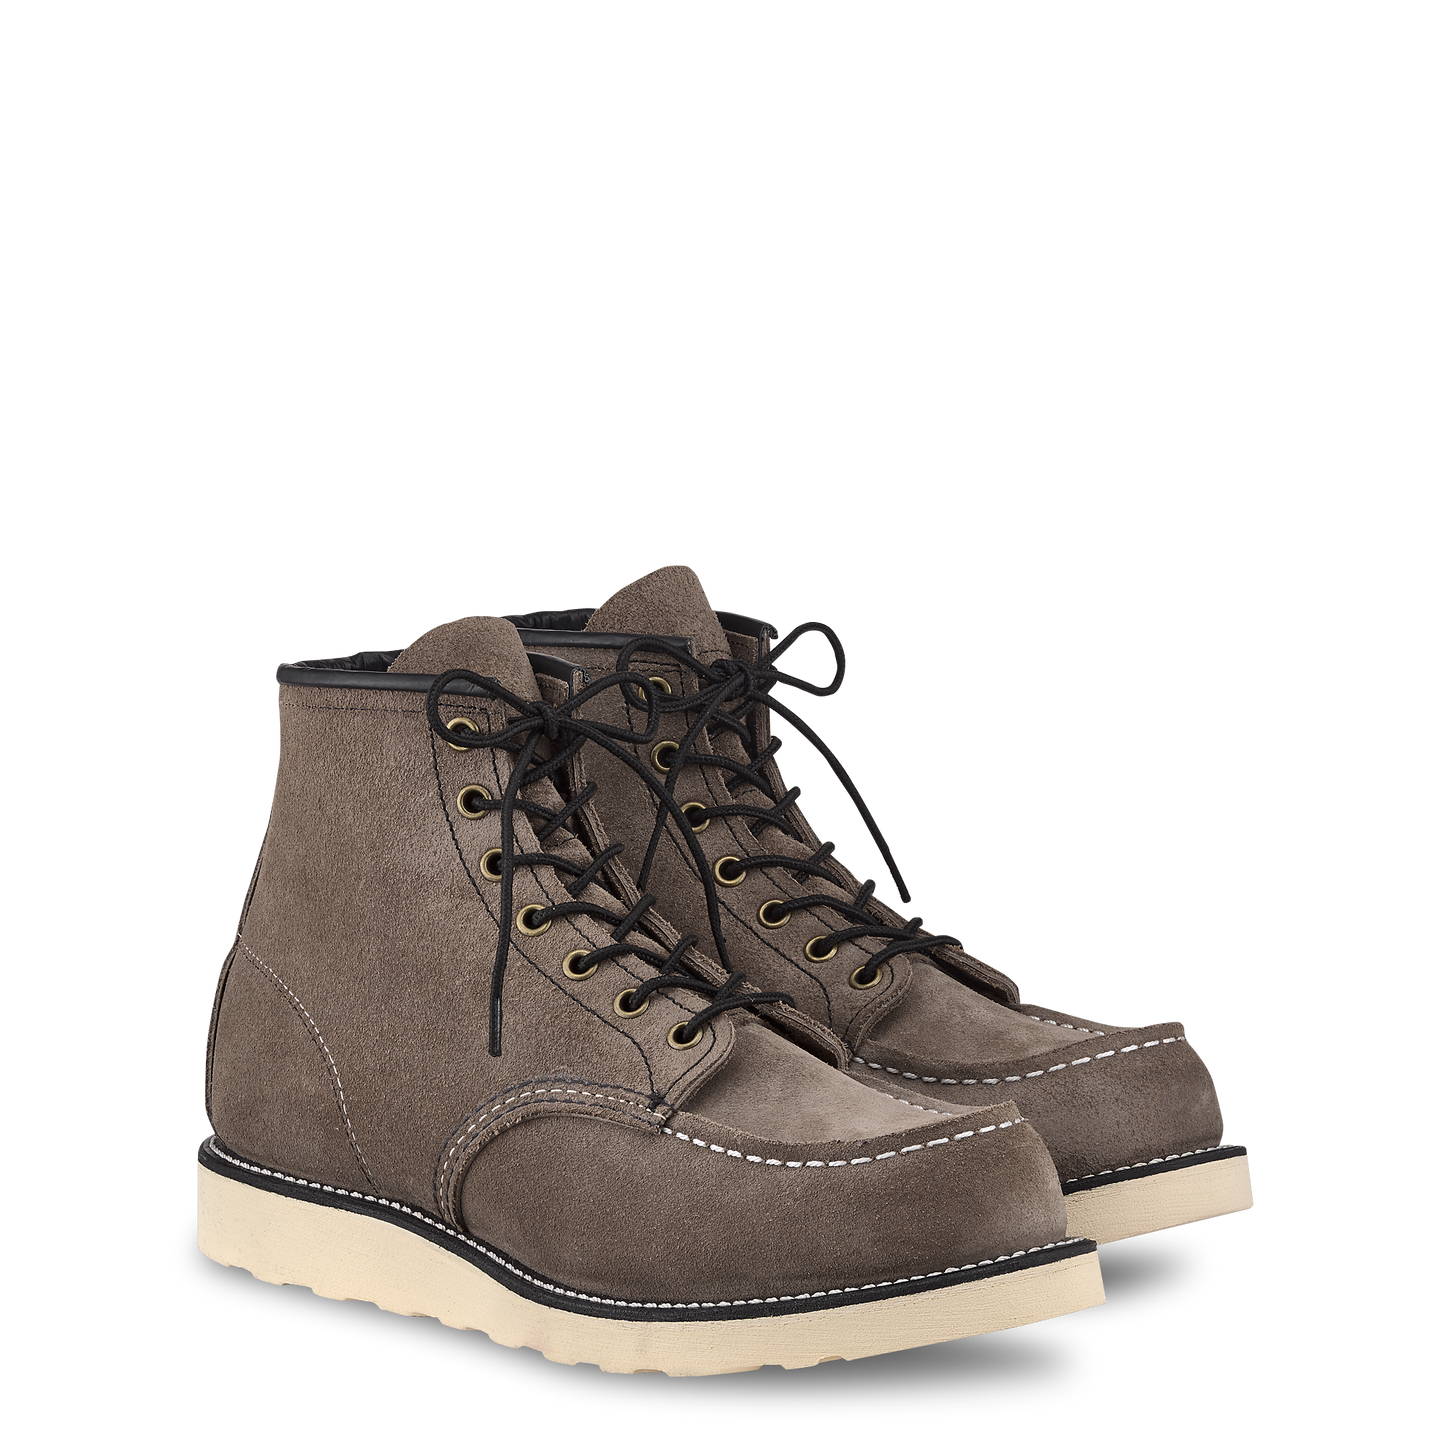 Red Wing 8863 6" Moc Toe Boot